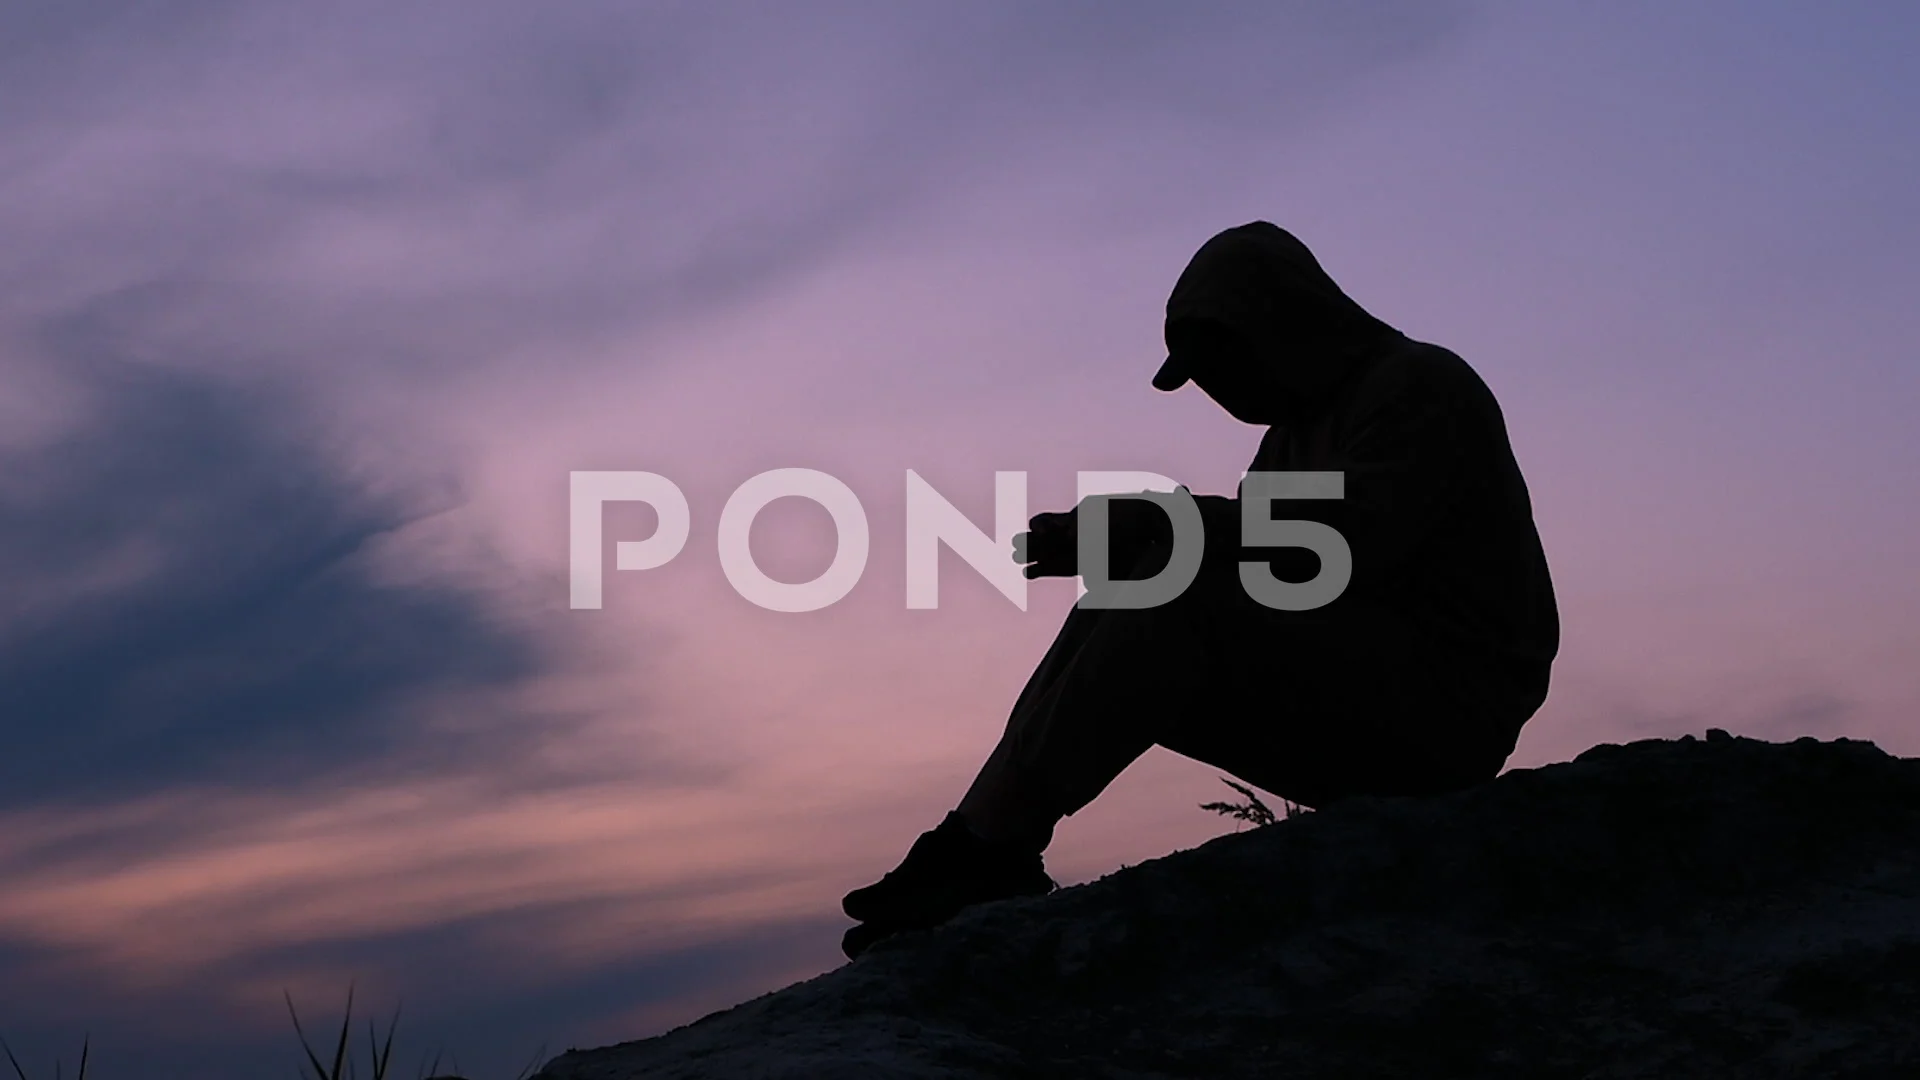 One Business Man Sad Lonely Silhouette Stock Photo - Image of